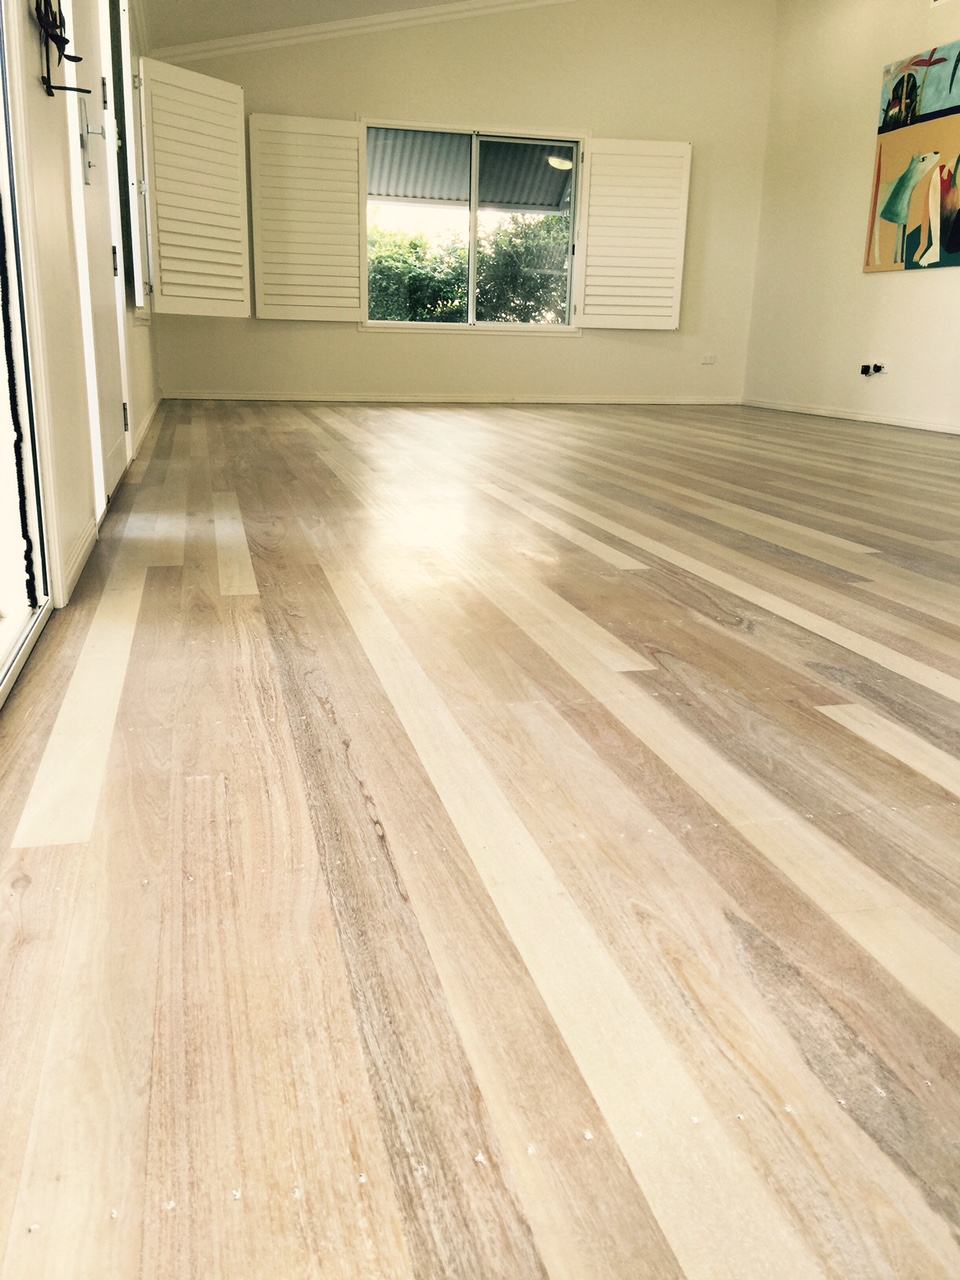 LiteniT Wood Bleaching System. Mixed Hardwood Floor Finished With Woca White Oil